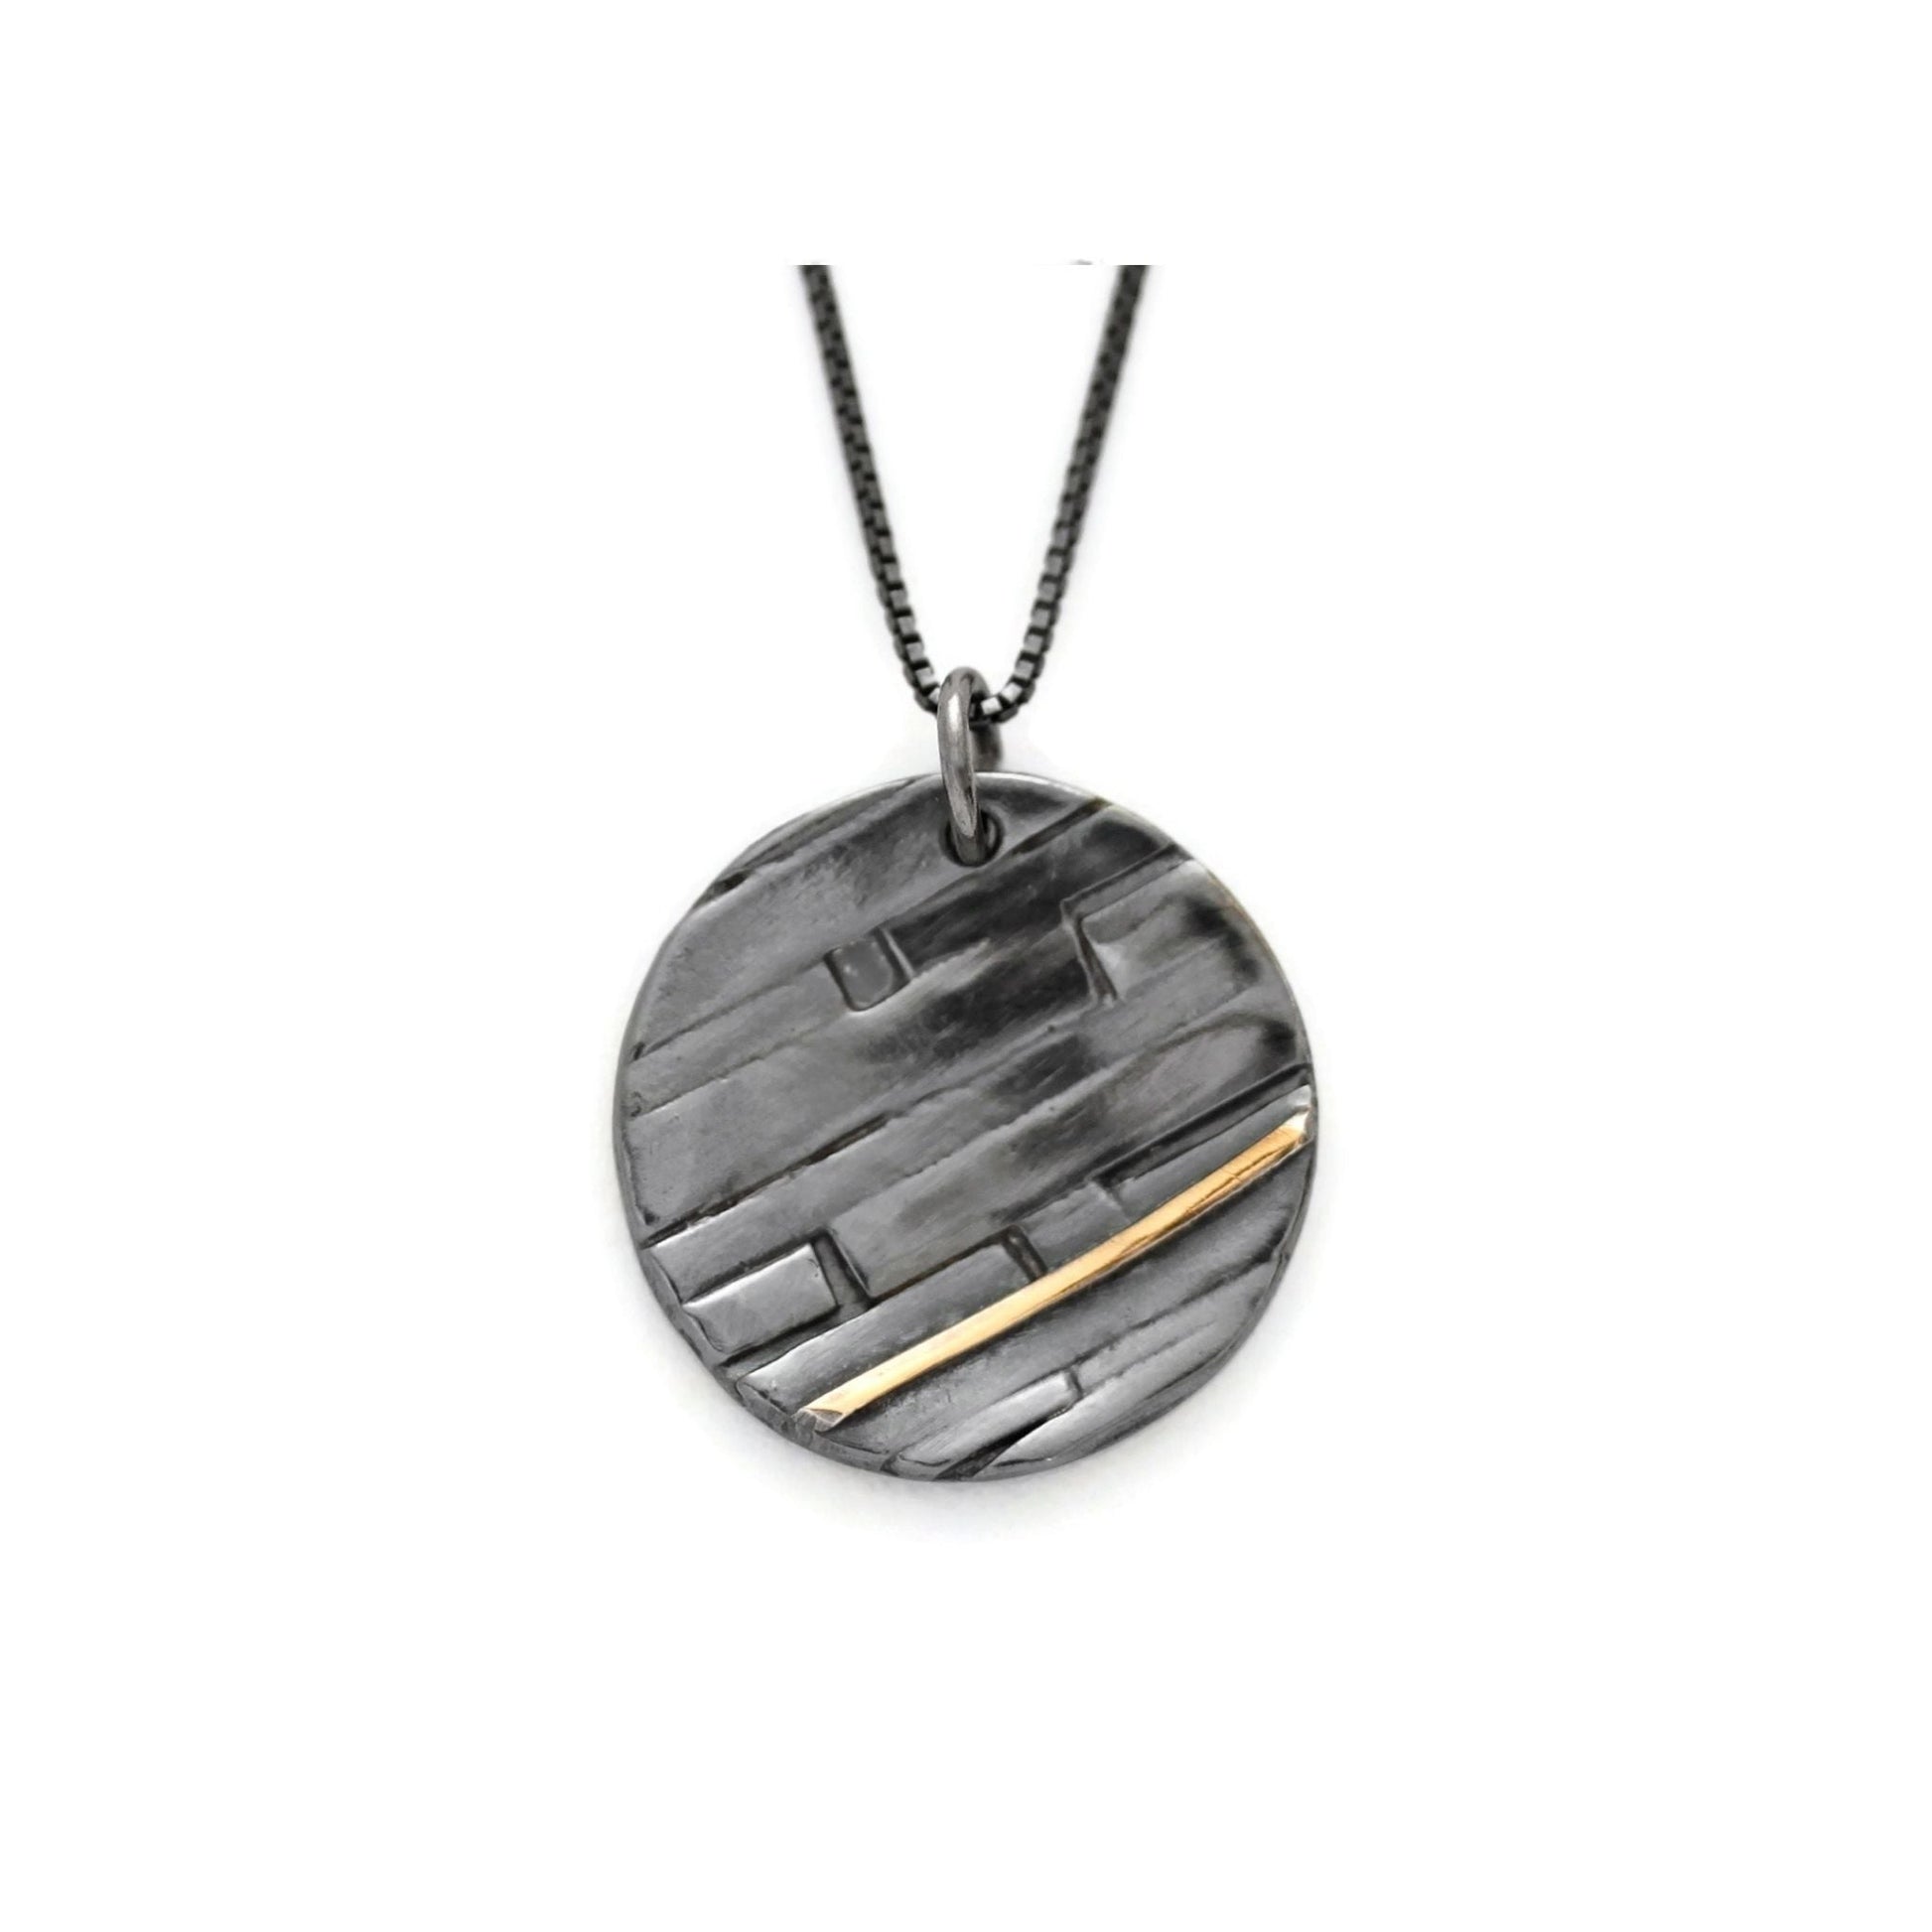 Oxidized sterling silver disc necklace